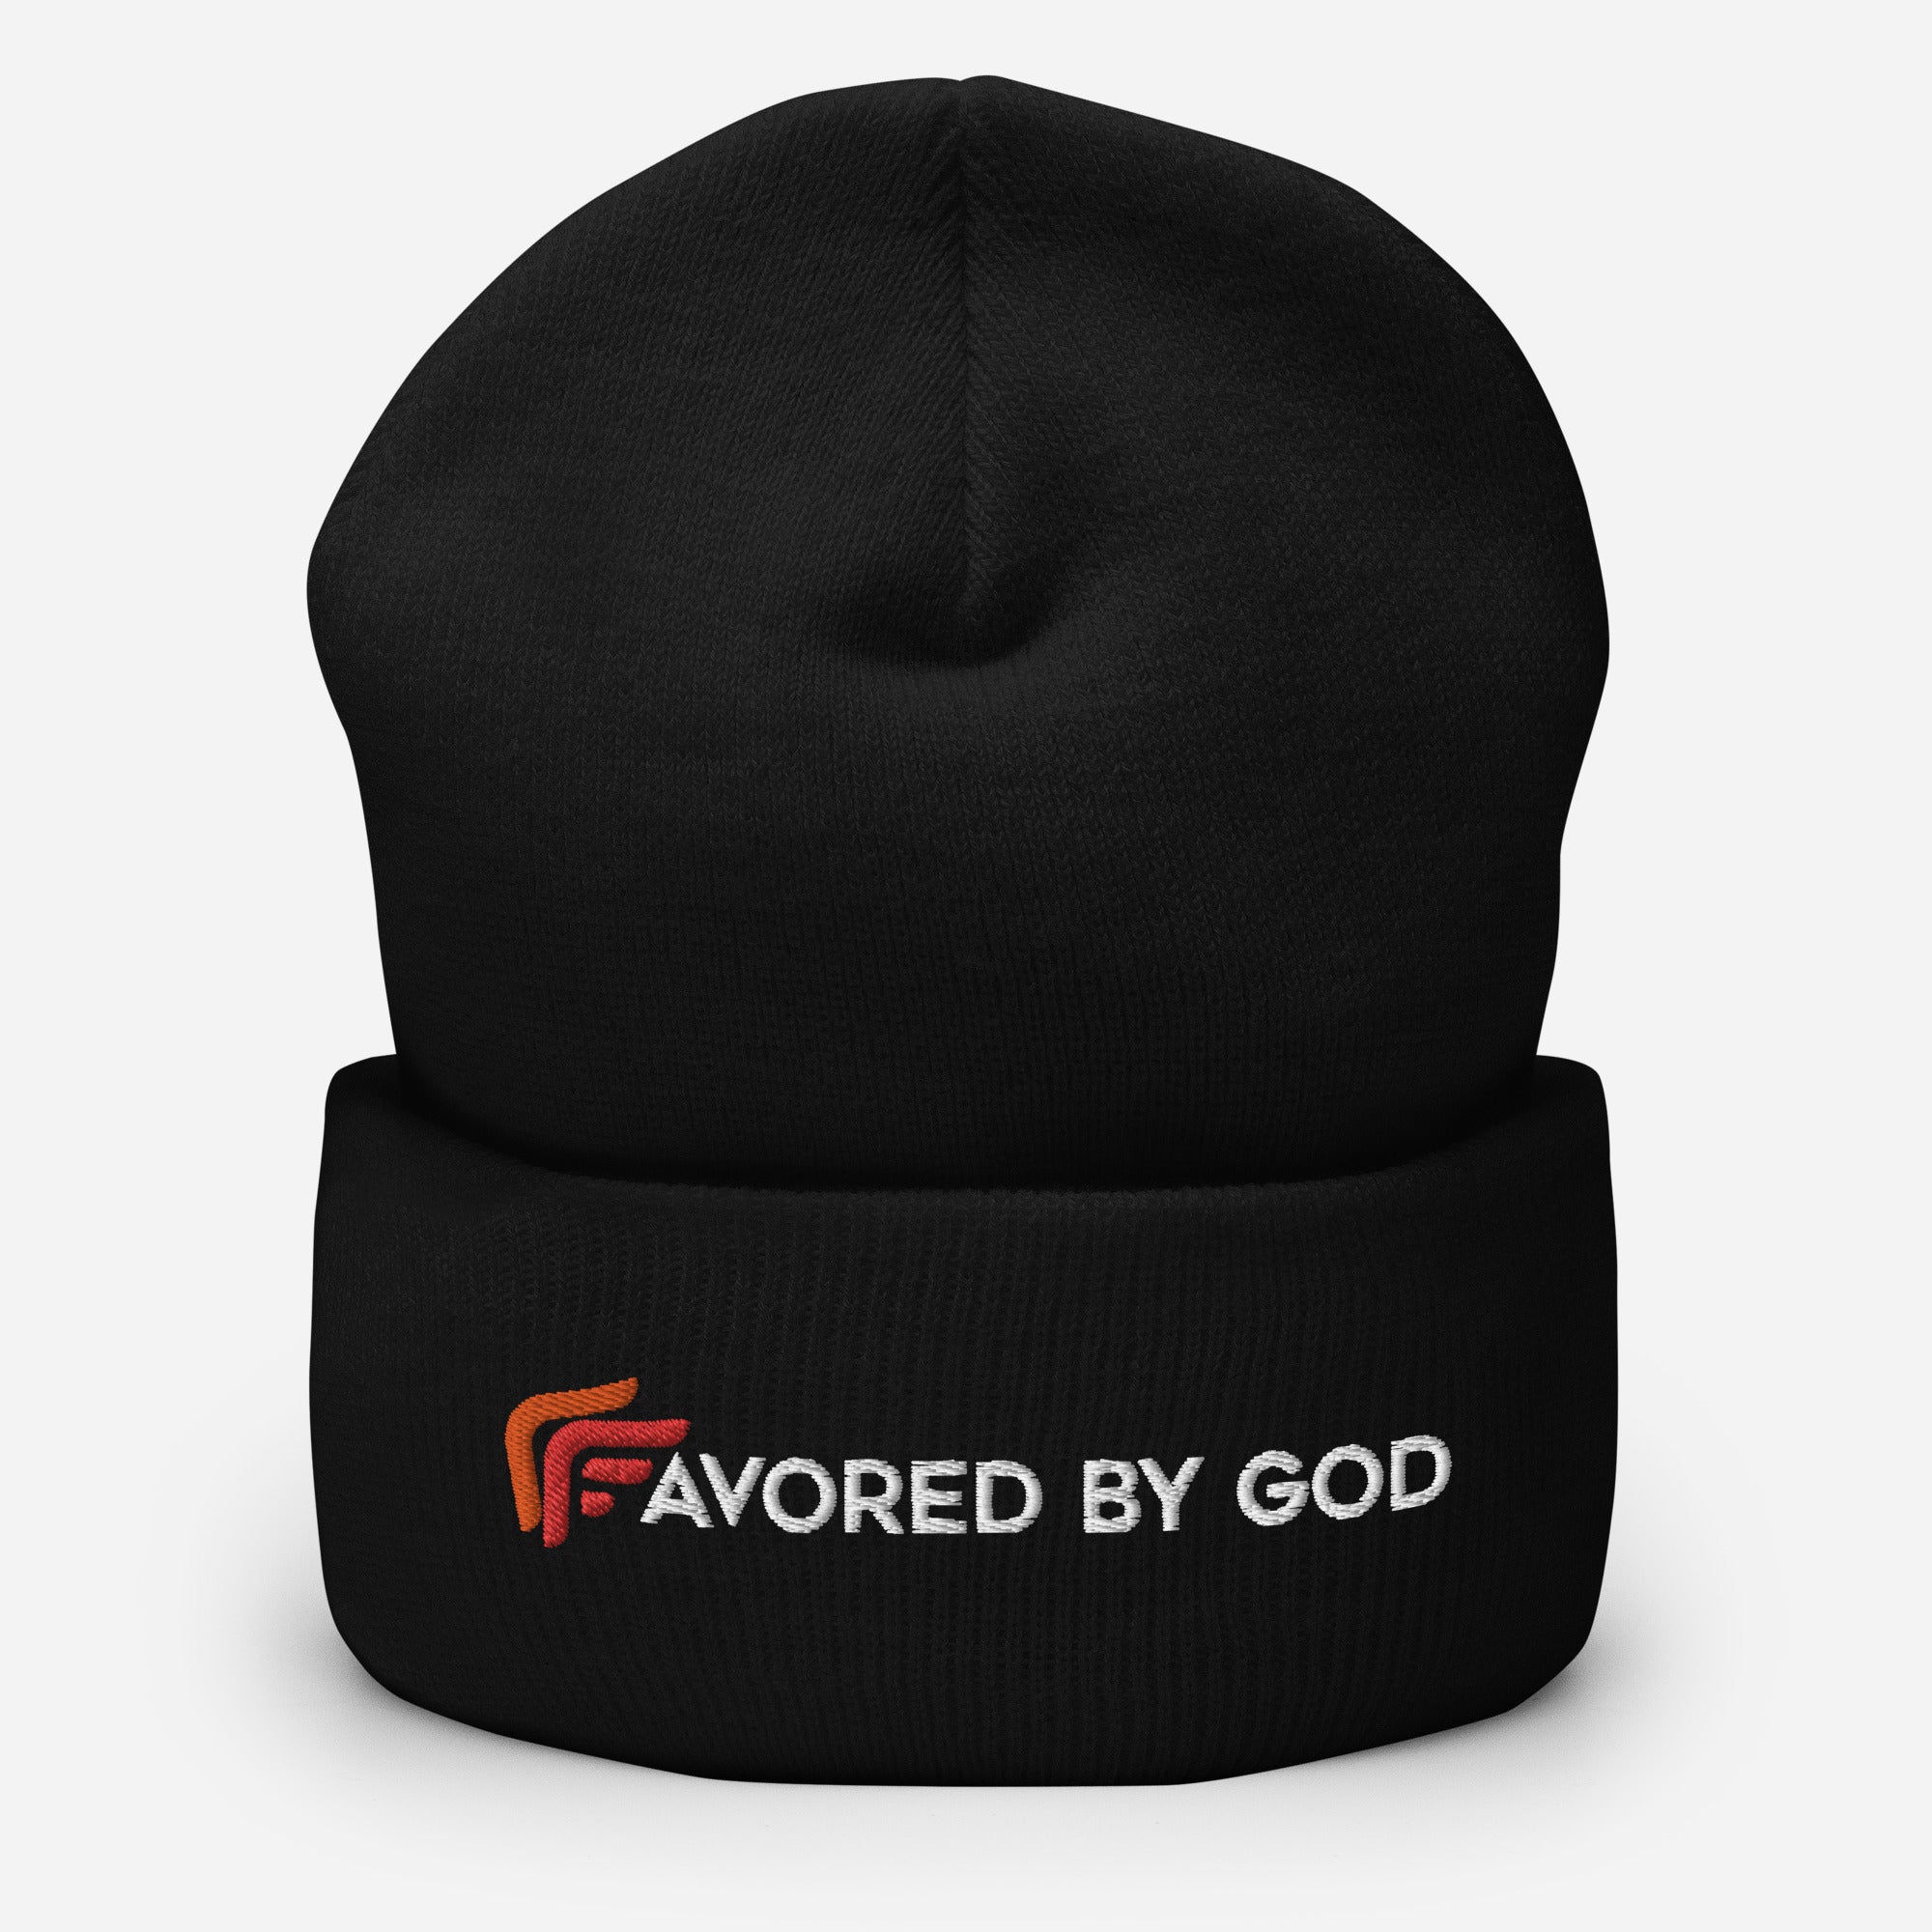 Favored By God Signature Beanie, Used By God, Used By God Clothing, Christian Apparel, Christian Hats, Christian T-Shirts, Christian Clothing, God Shirts, Christian Sweatshirts, God Clothing, Jesus Hoodie, Jesus Clothes, God Is Dope, Art Of Homage, Red Letter Clothing, Elevated Faith, Active Faith Sports, Beacon Threads, God The Father Apparel